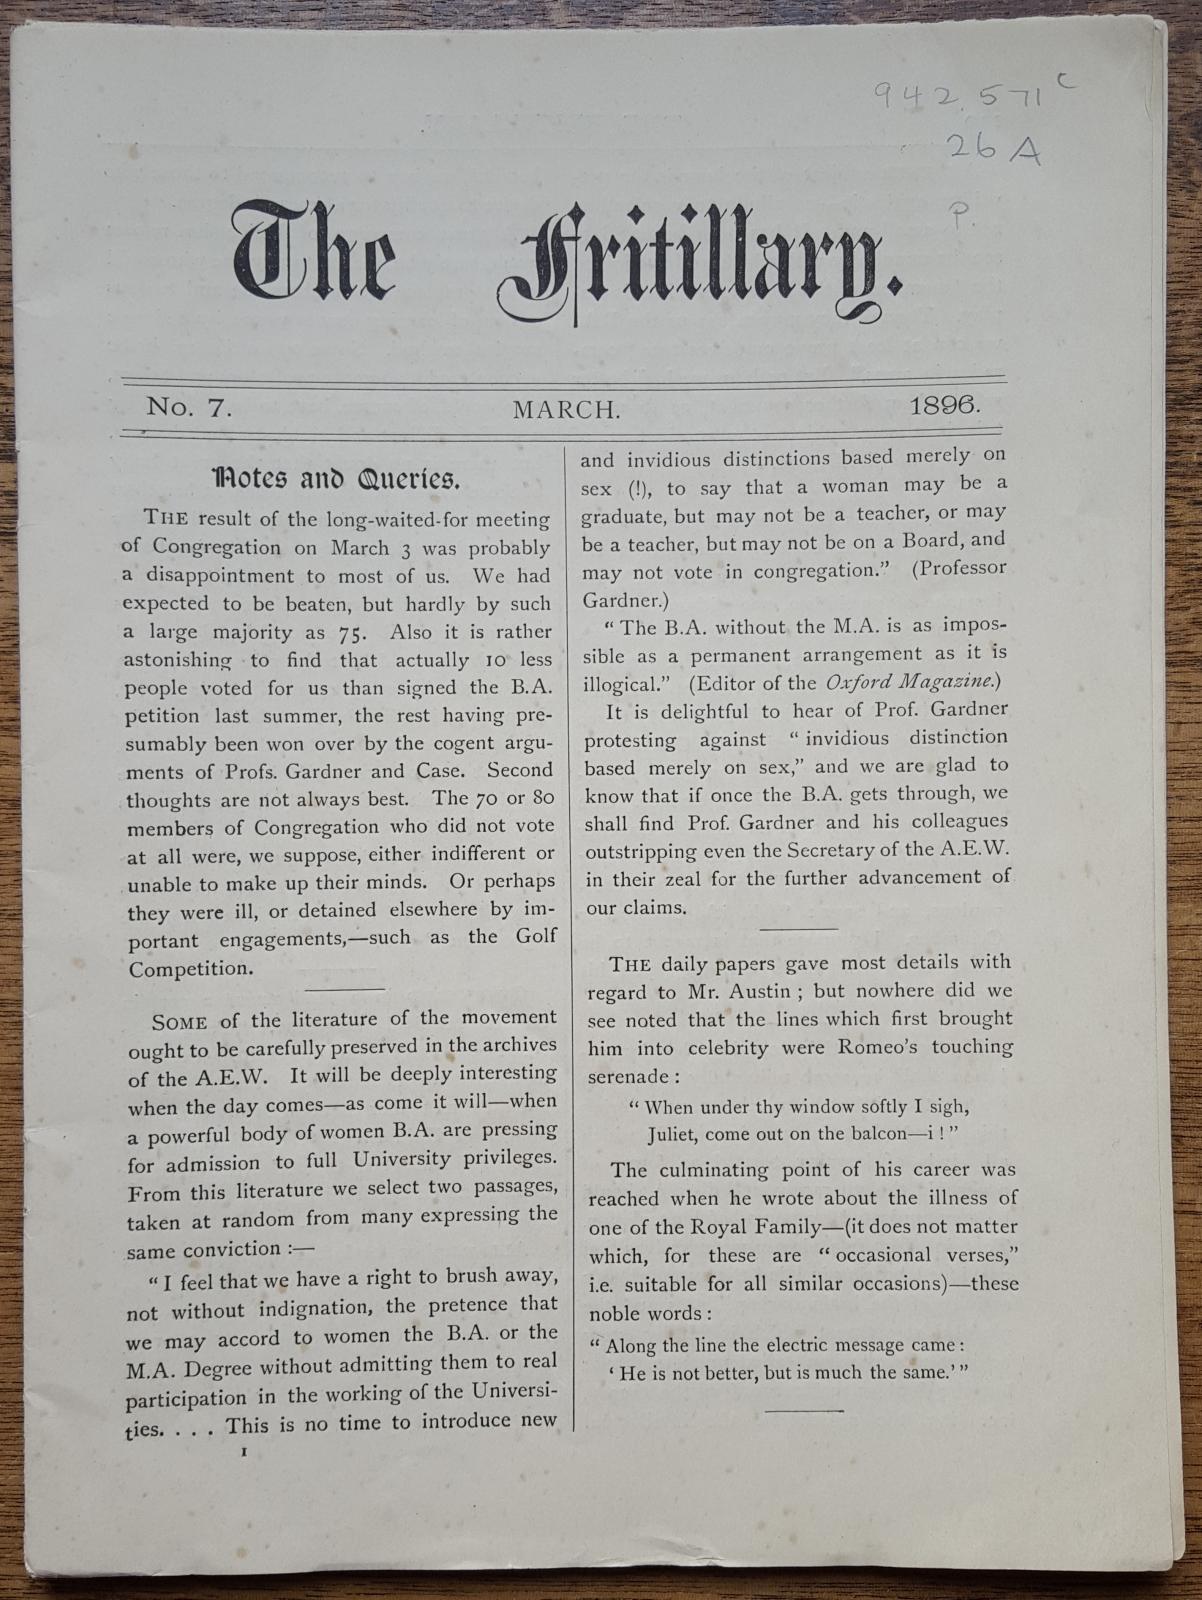 The Fritillary, the termly magazine of the Oxford women’s colleges